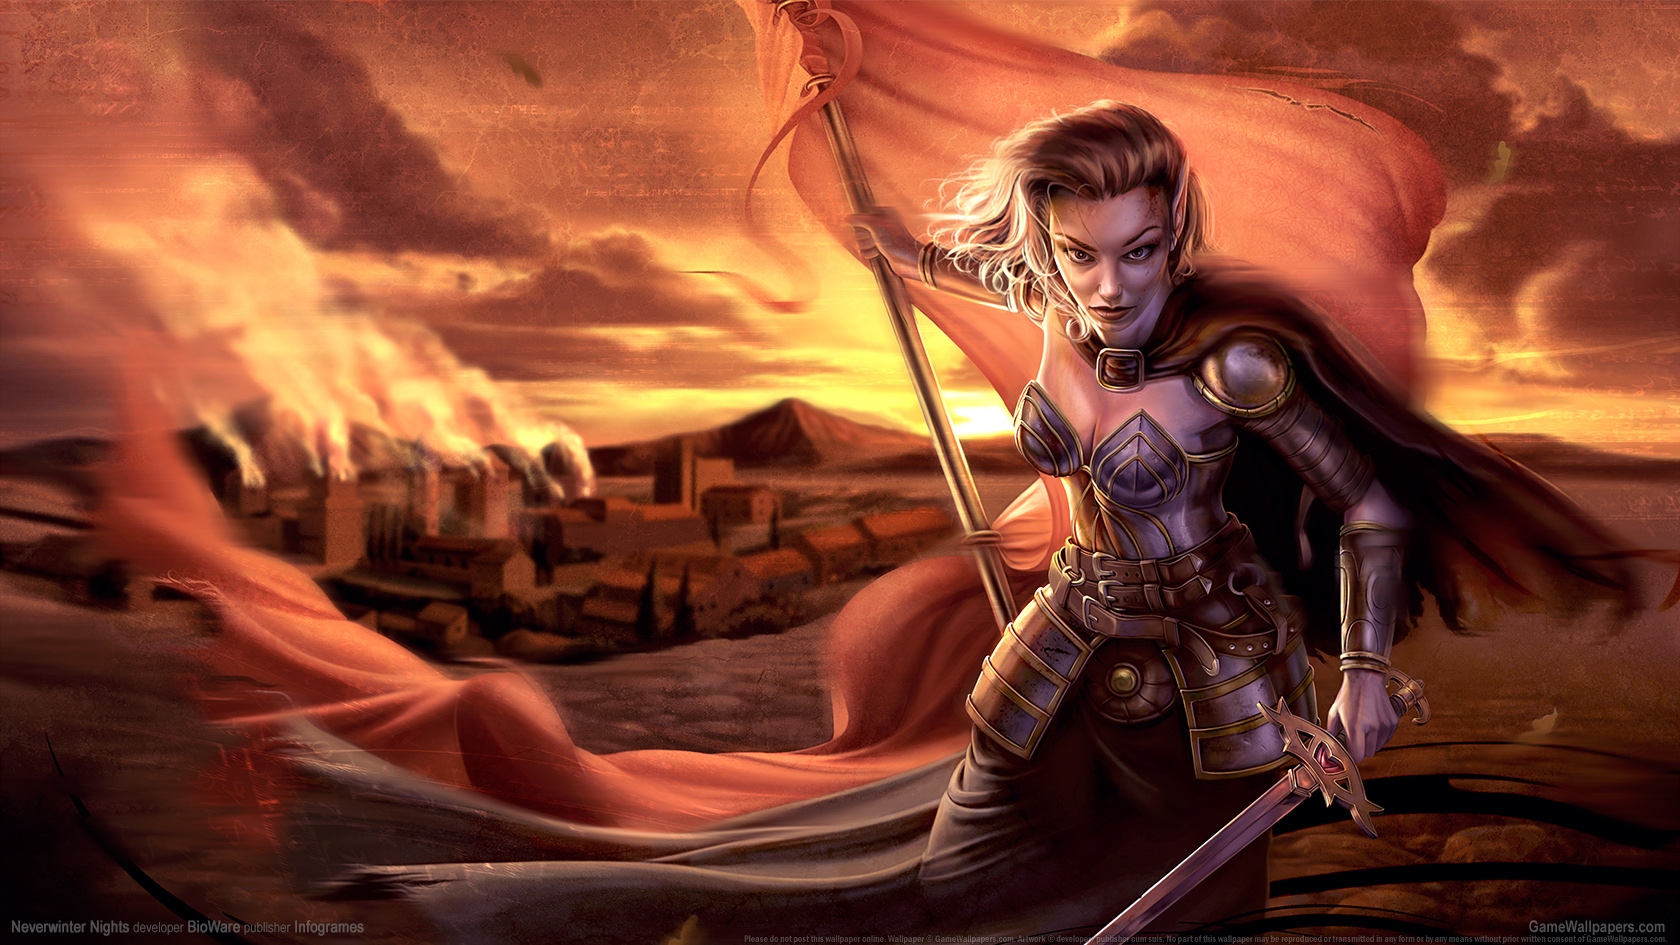 Neverwinter Nights 1680x945 wallpaper or background 11